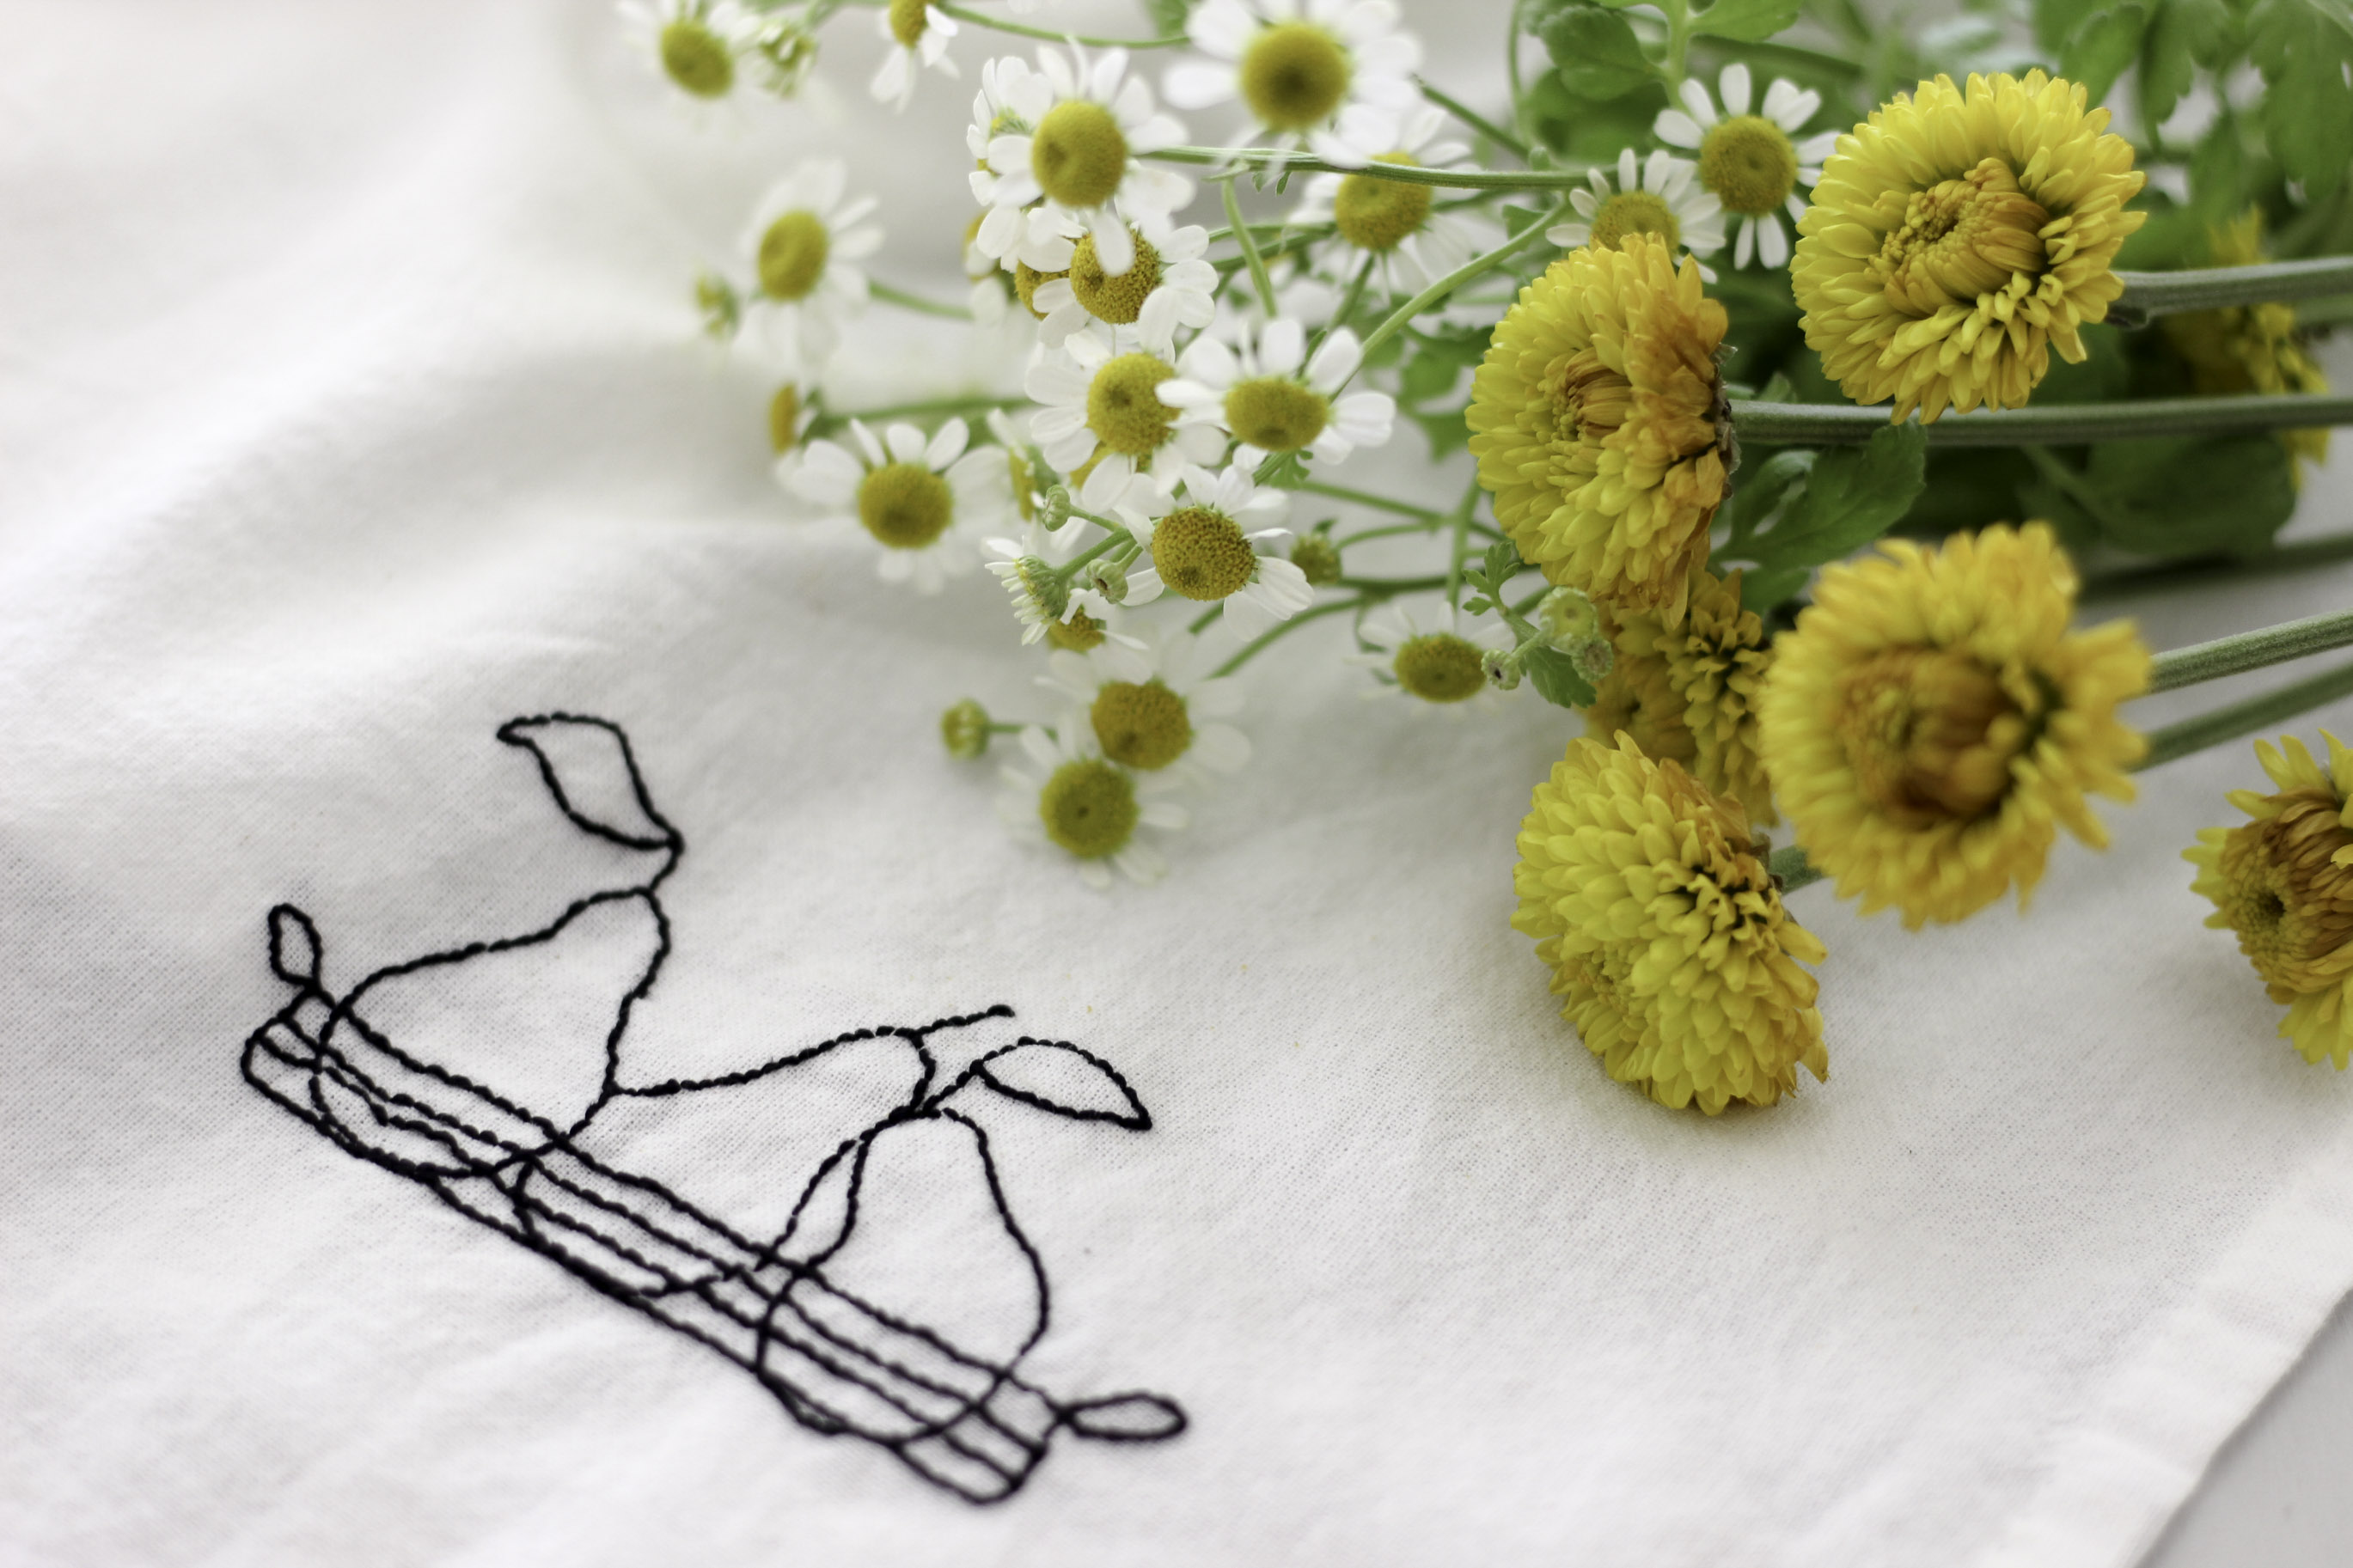 Embroidered tea towels with Aurifloss.